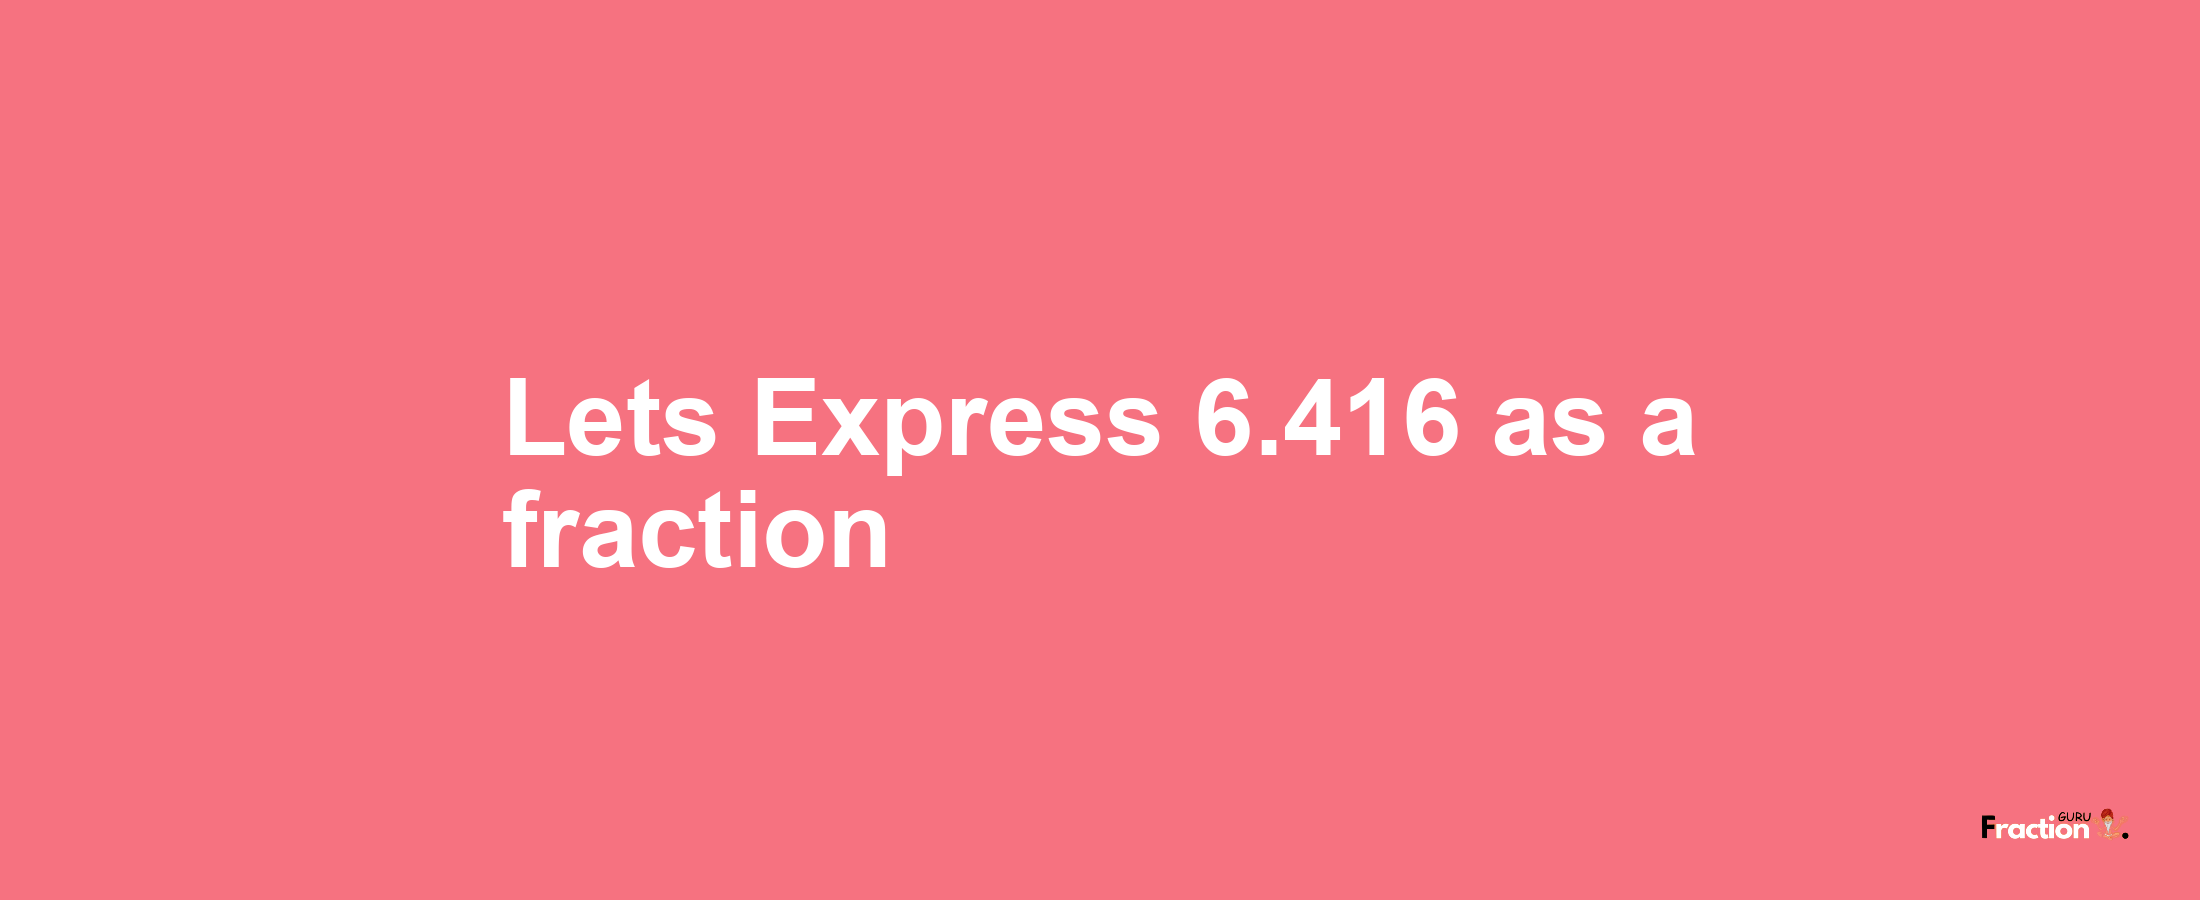 Lets Express 6.416 as afraction